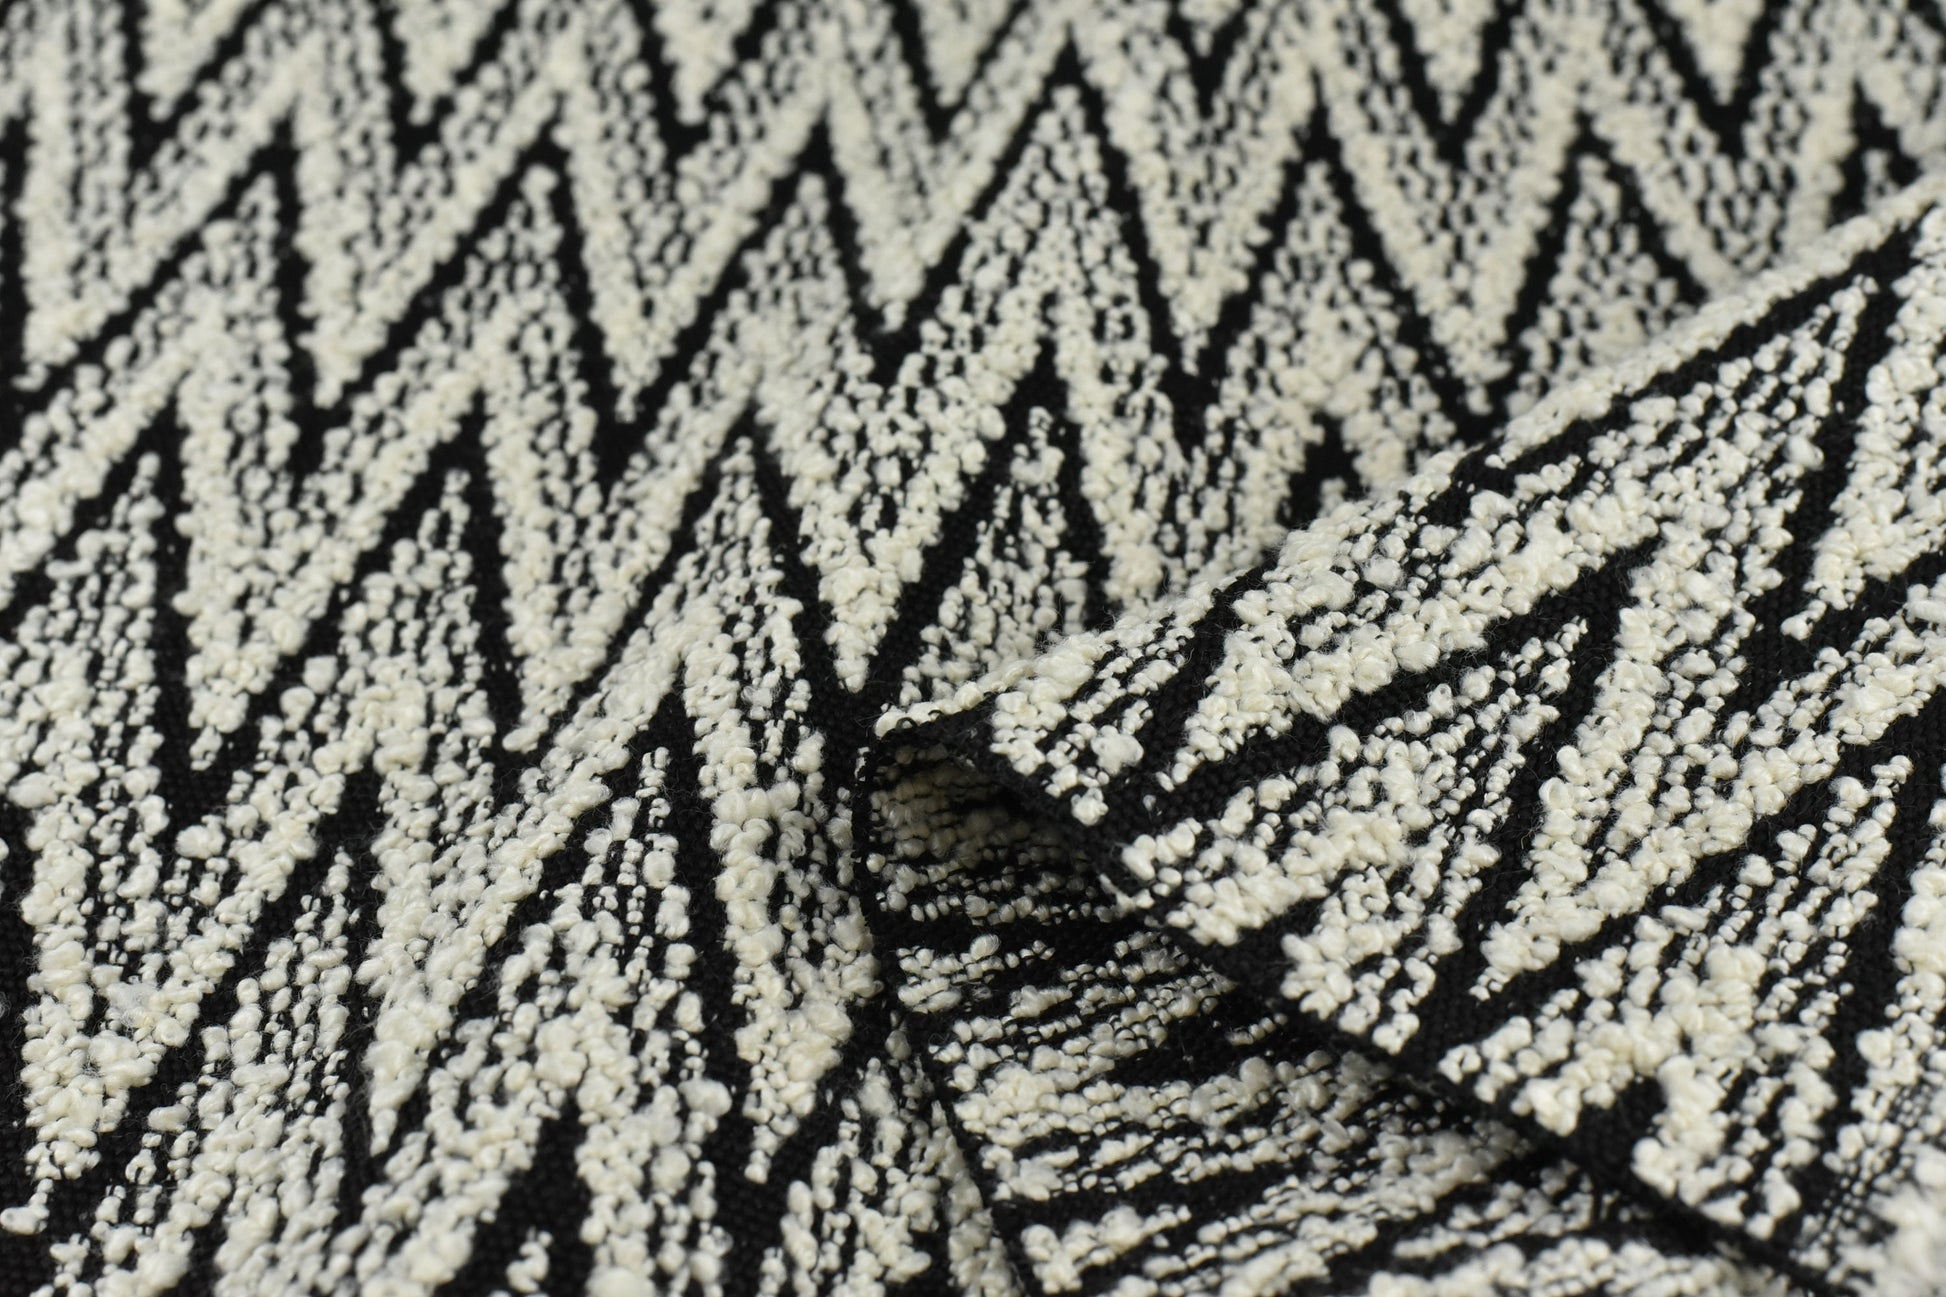 Extra Heavy Weight Herringbone Boucle Textured Upholstery Fabric in Black and White|Designer Geometric Boucle Fabric By The Yard 55"/860GSM